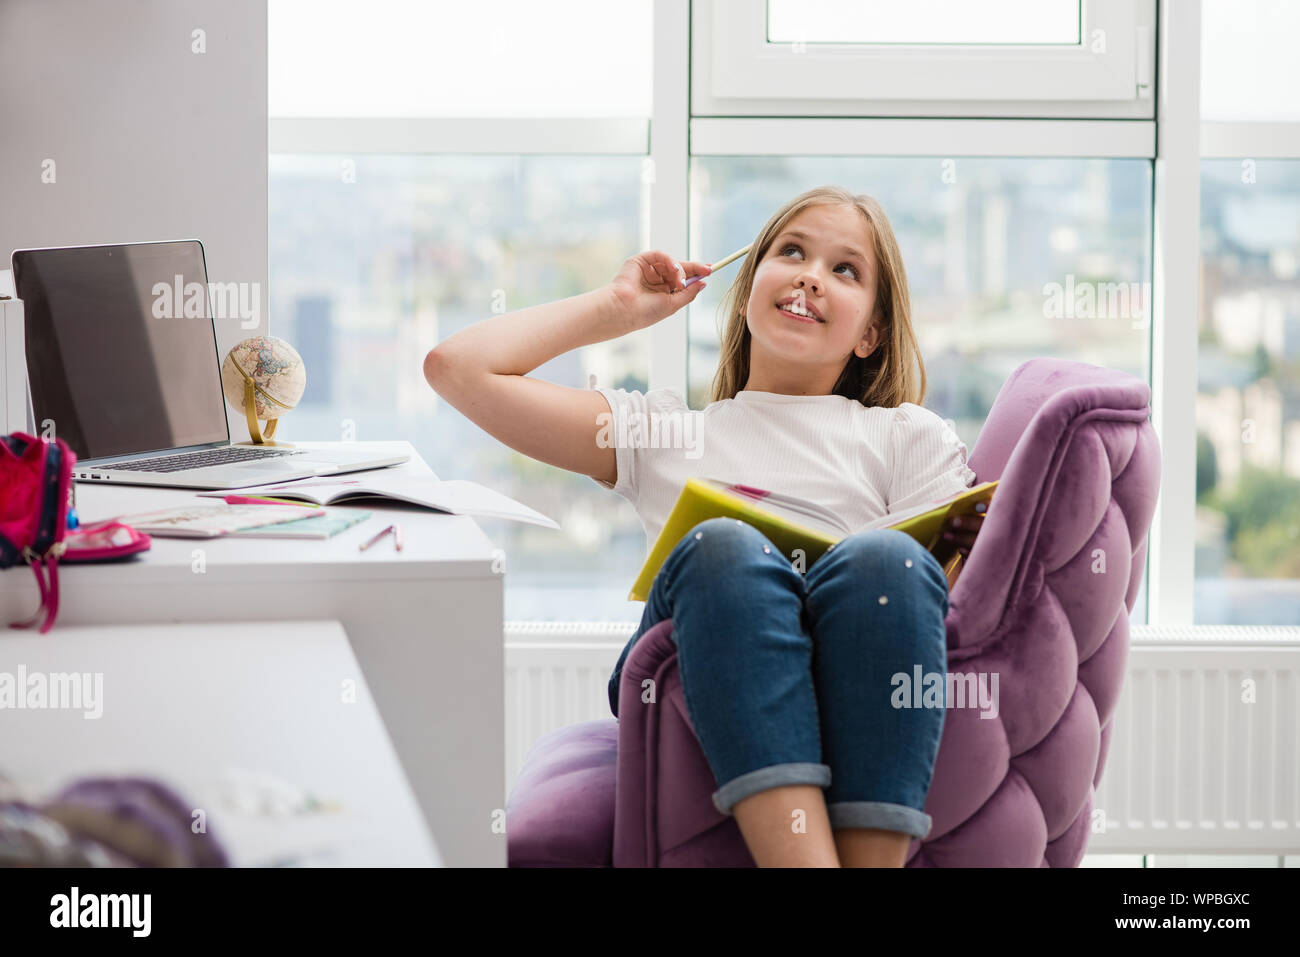 Dreaming pretty school girl with book and pencil. School supplies and laptop in background. Girl sitting in her room with a large window. Stock Photo